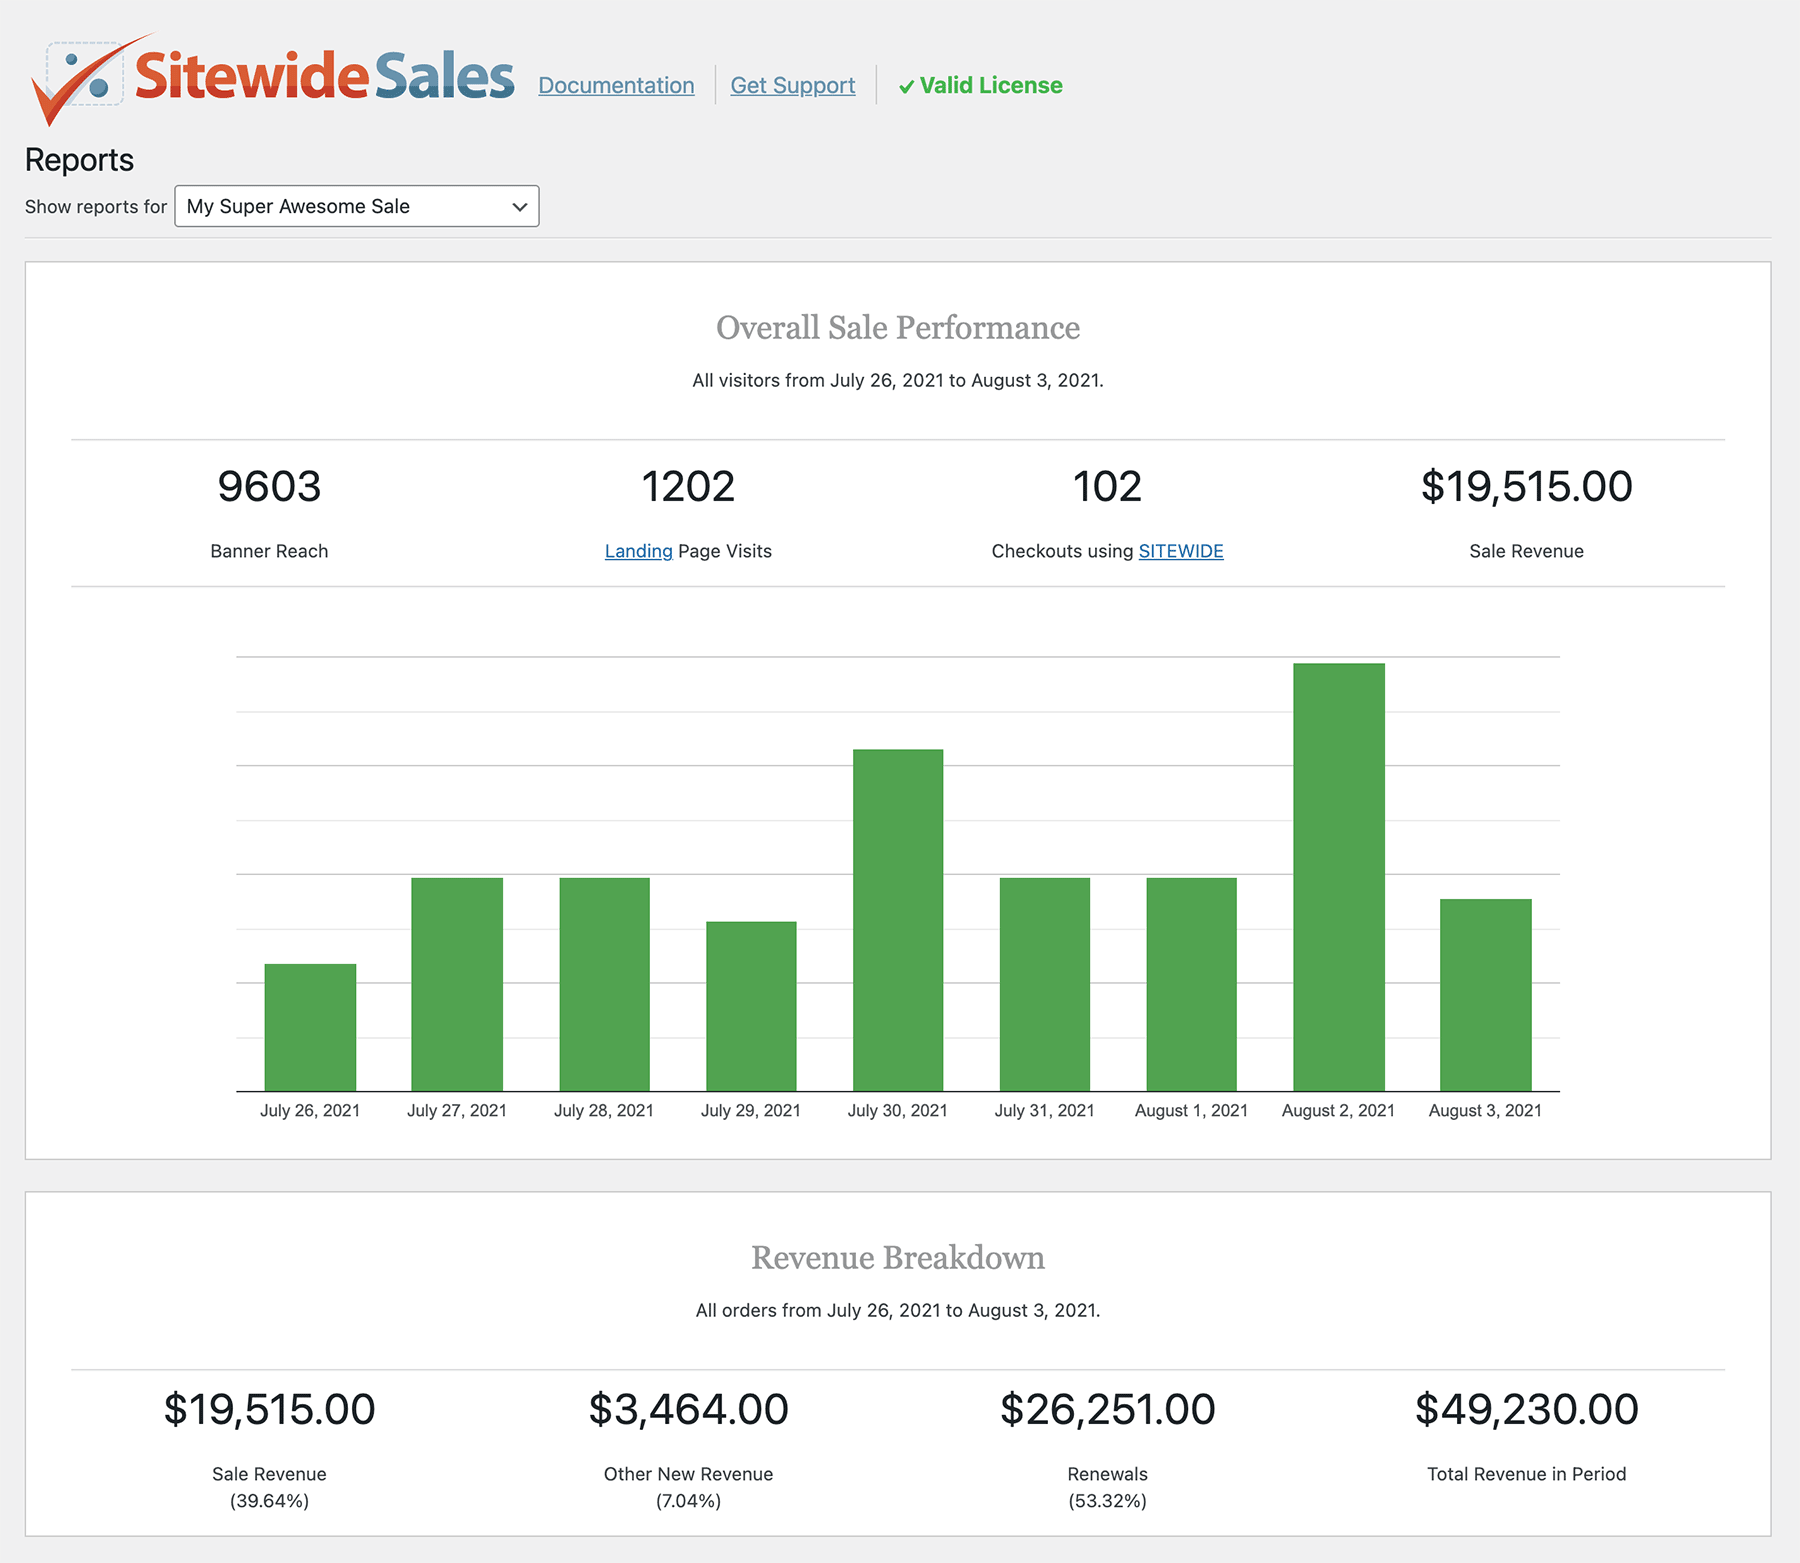 Screenshot of the Sitewide Sales Sale Reports showing Visits, Conversions, Code Uses, and Revenue in period.